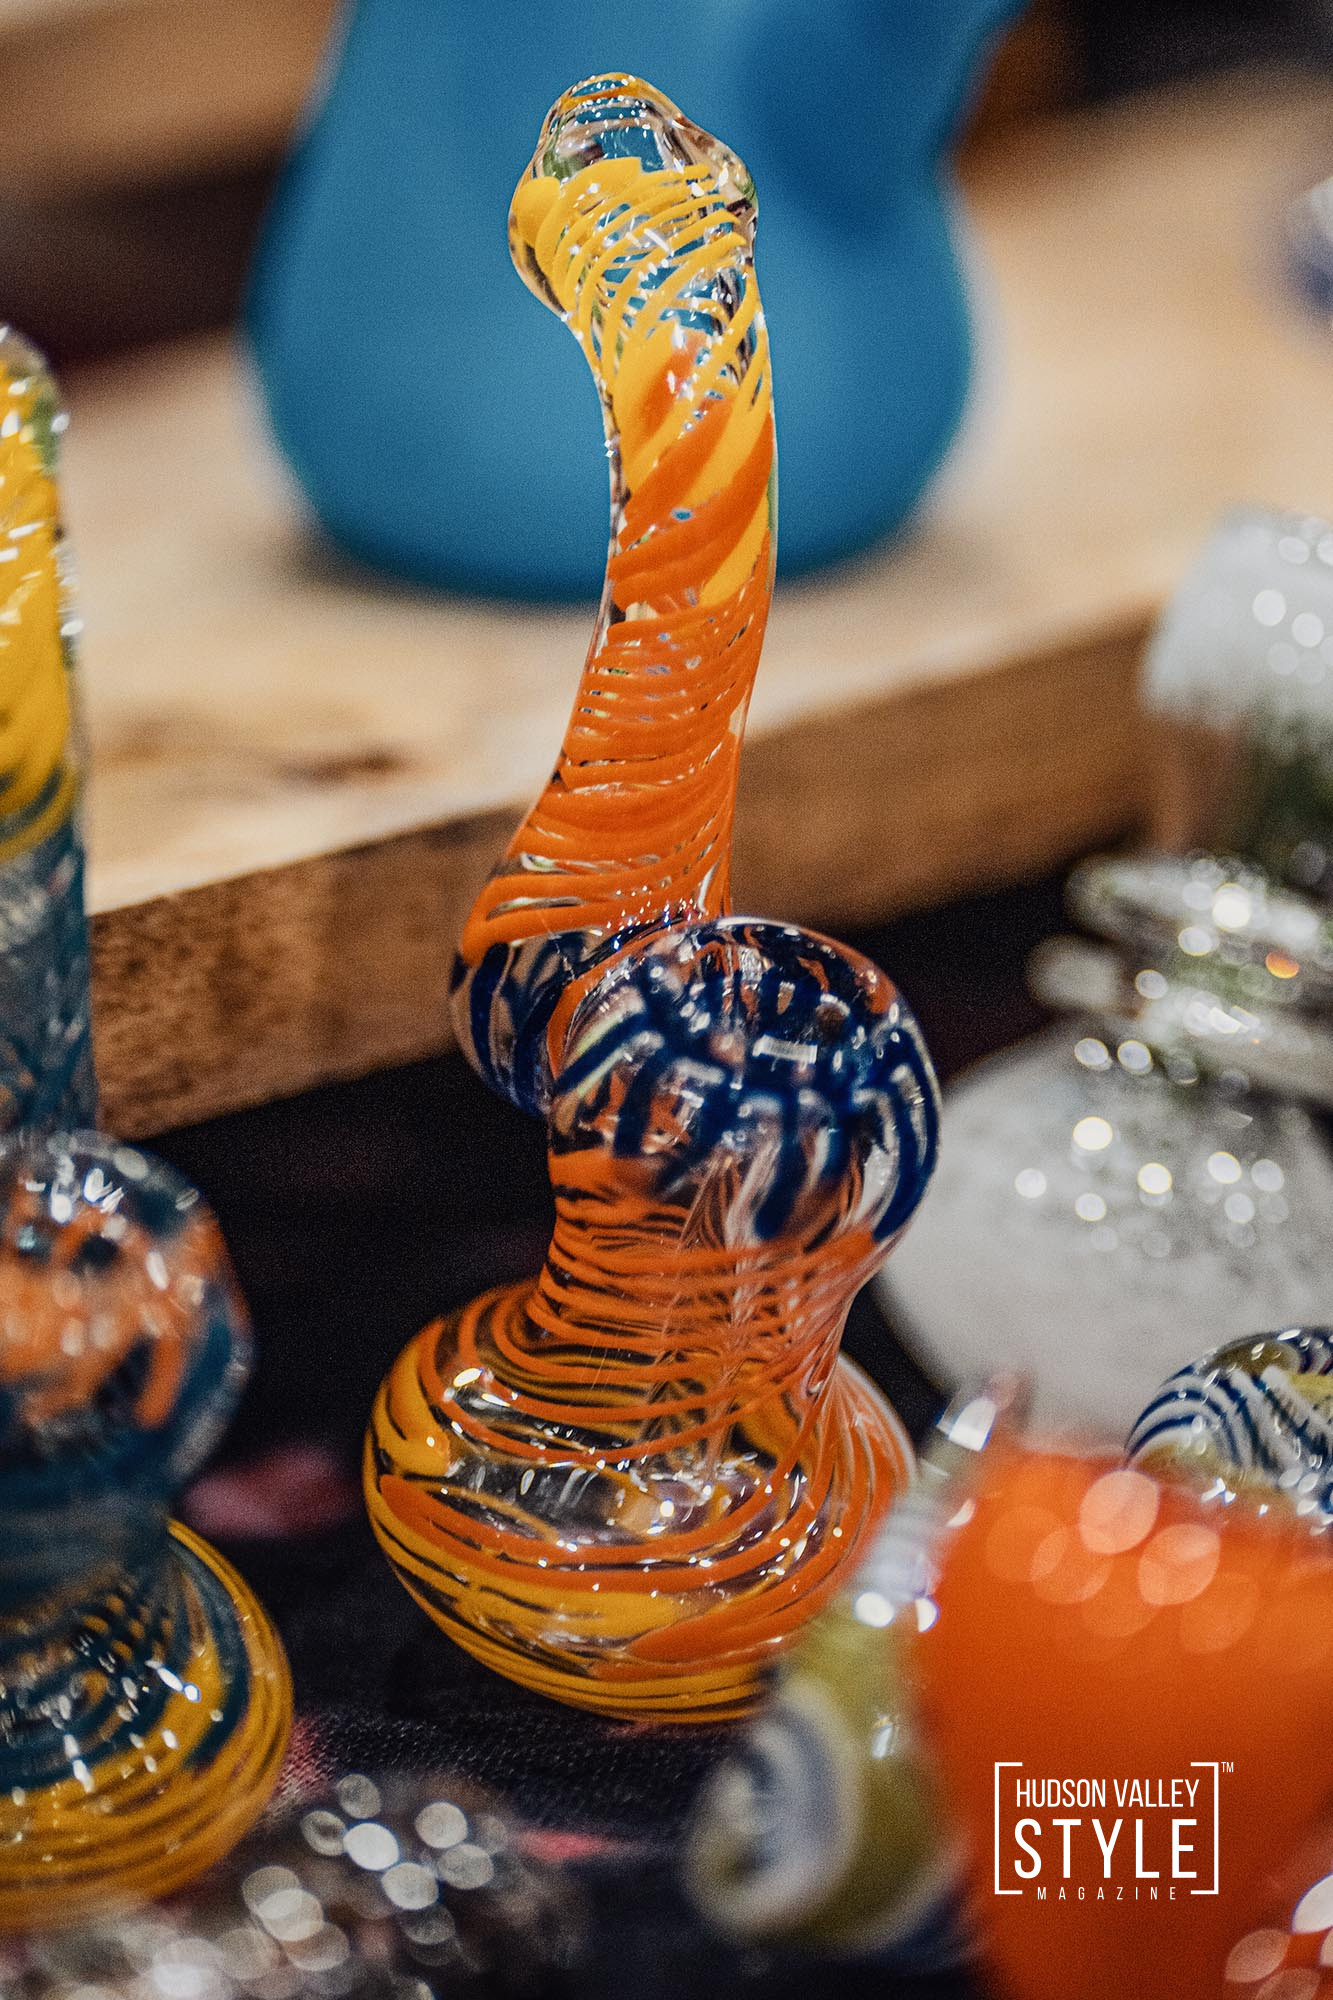 Cannastock 2023 Cannabis Festival, New York: A Vibrant Celebration of Cannabis and Community in the Hudson Valley – Photo Report by Photographer Maxwell Alexander, Duncan Avenue Studios